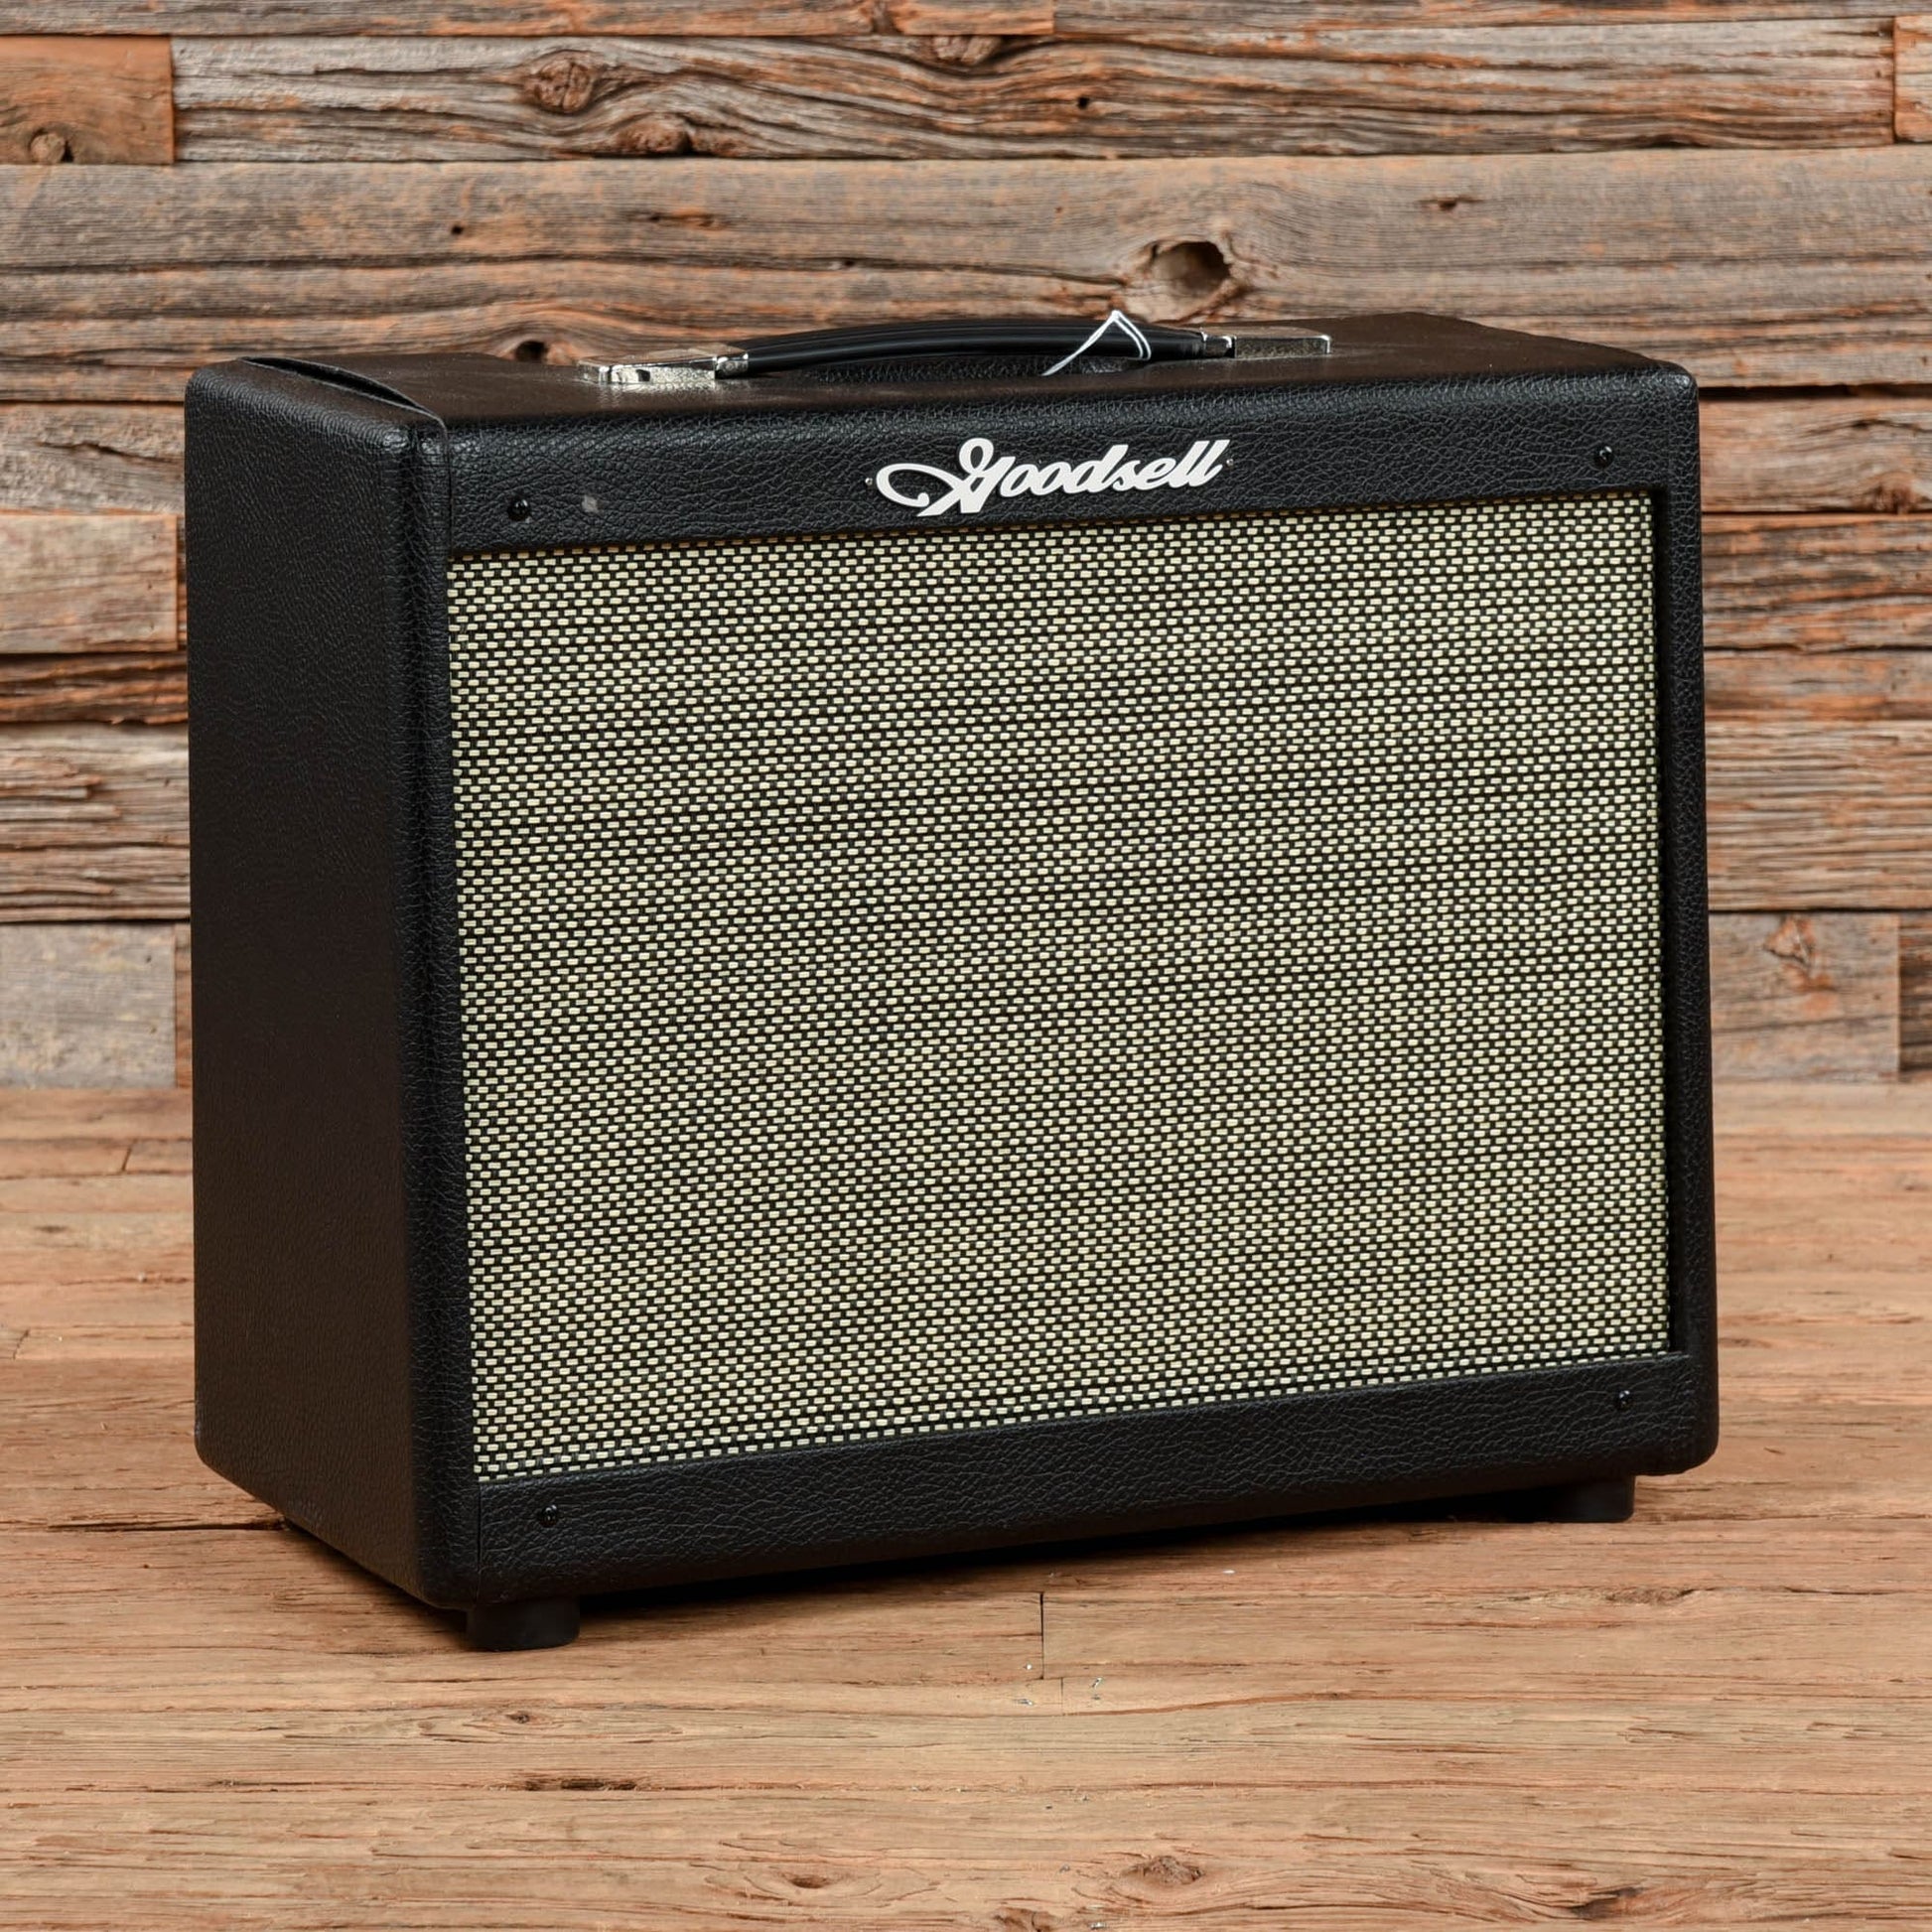 Goodsell Unibox Reverb Combo Amps / Guitar Cabinets